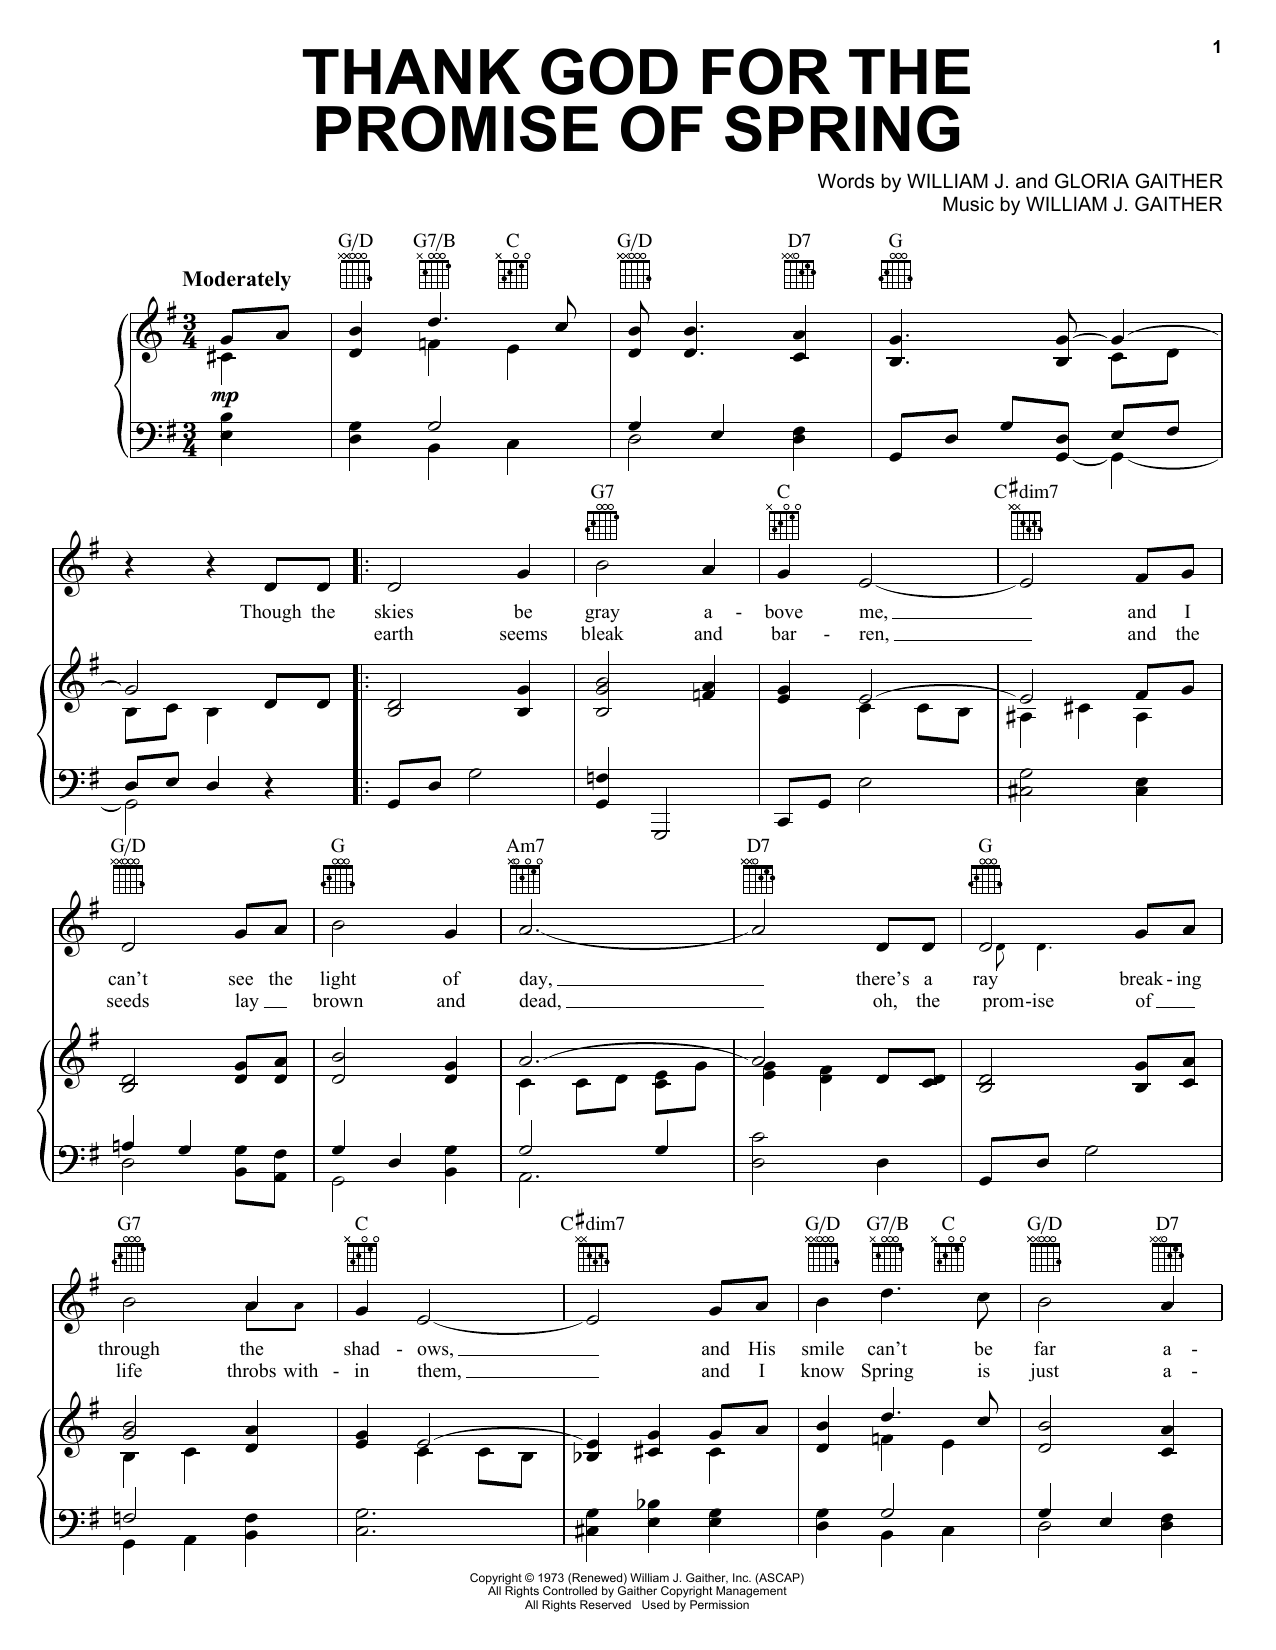 Download Bill & Gloria Gaither Thank God For The Promise Of Spring Sheet Music